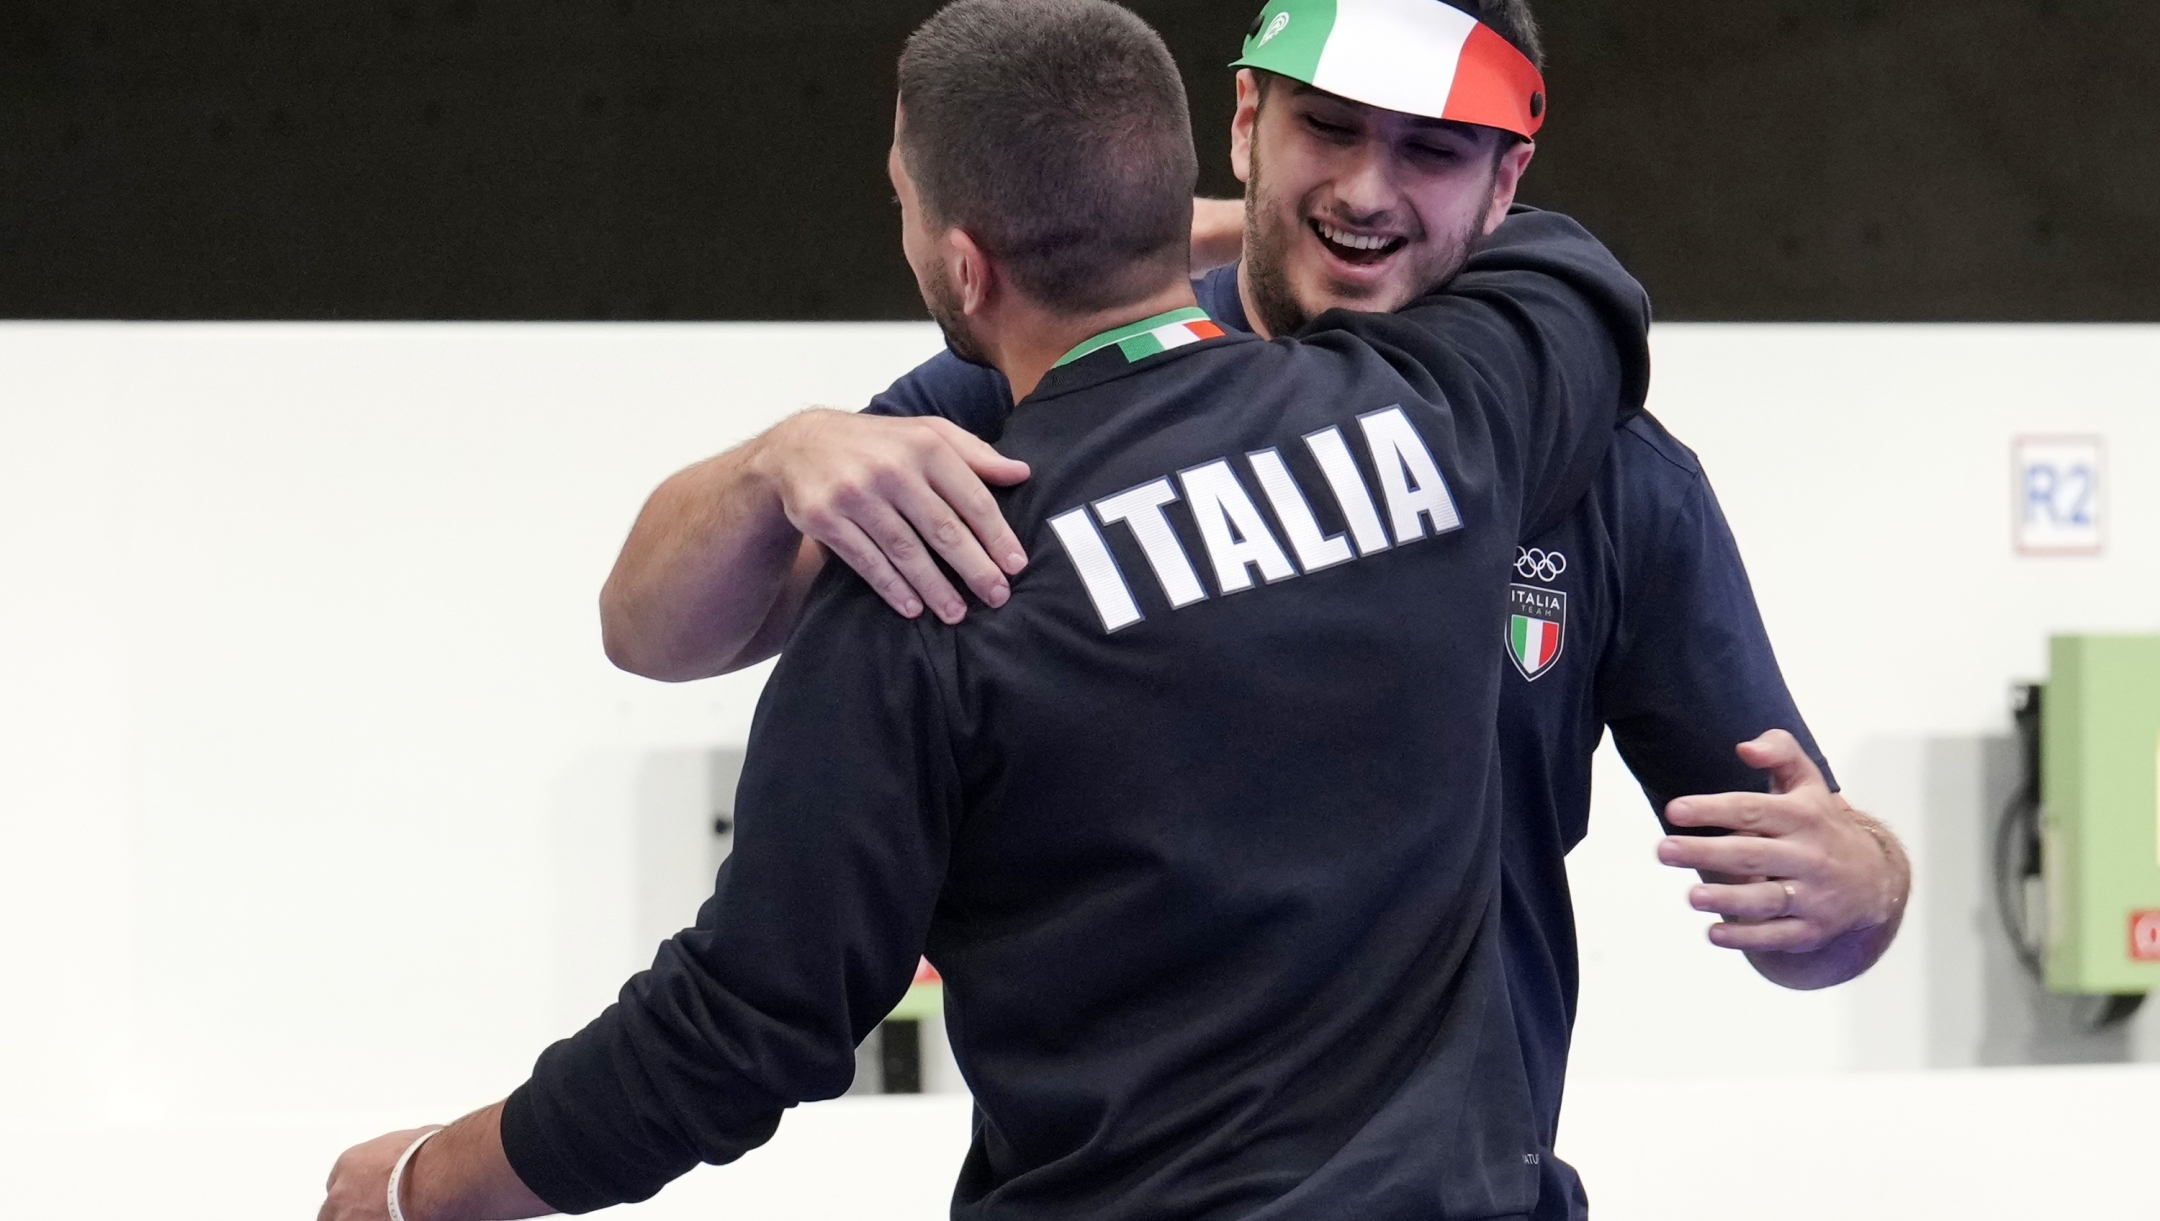 Italy's Frederico Nilo Maldini, facing the camera, hugs fellow countryman Italy's Paolo Monna after finishing second and third respectively in the 10m air pistol men's final at the 2024 Summer Olympics, Sunday, July 28, 2024, in Chateauroux, France. (AP Photo/Manish Swarup)